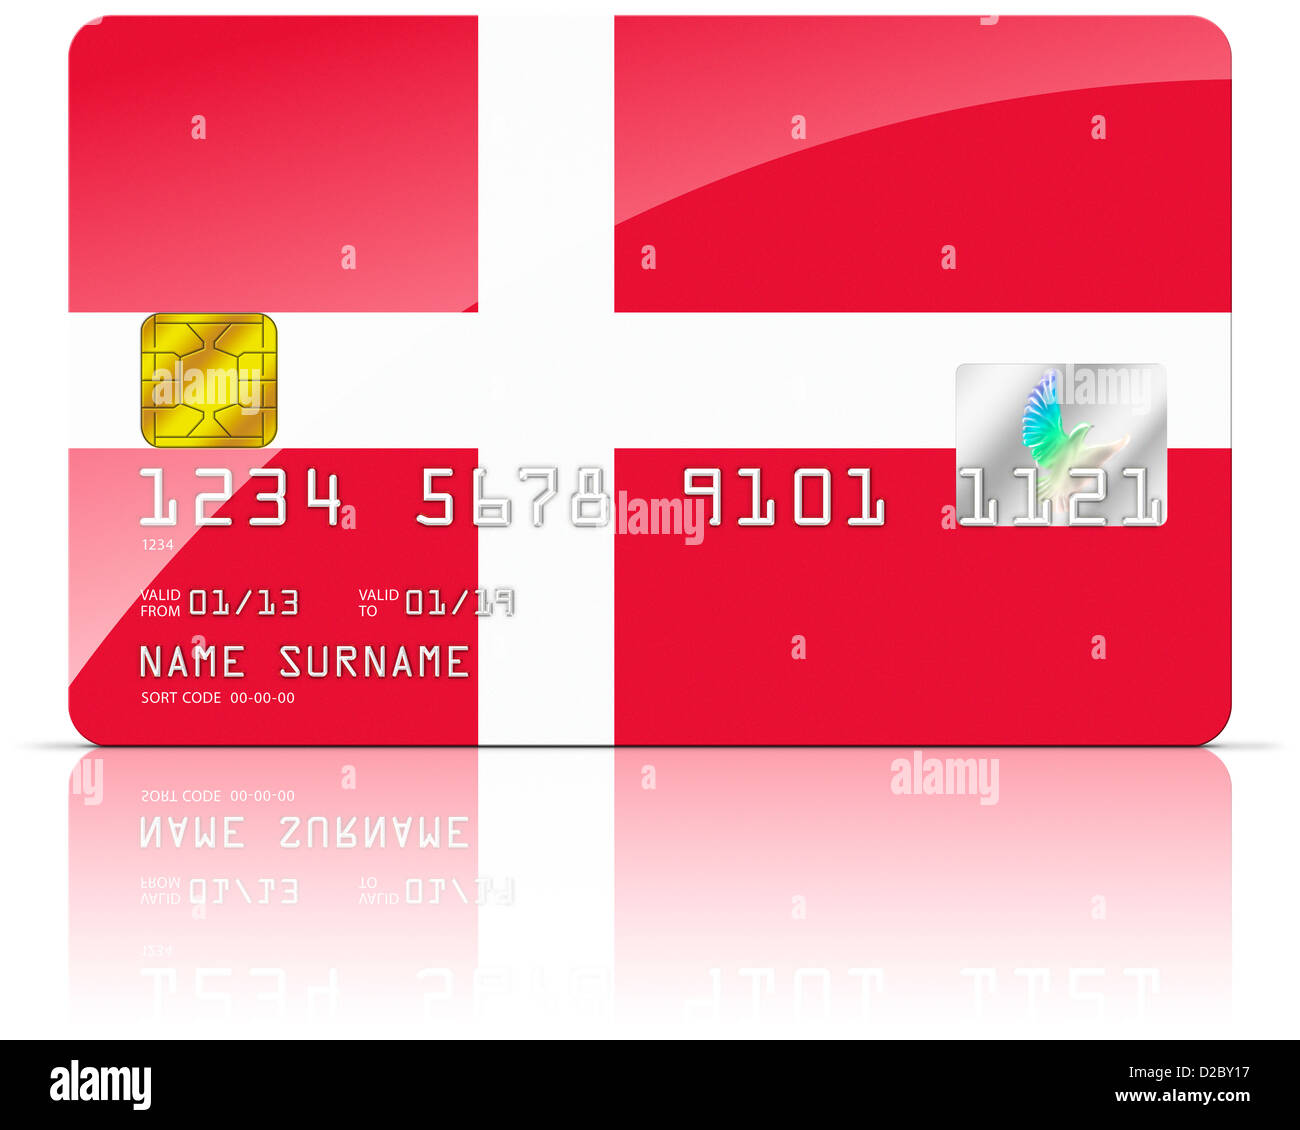 Denmark credit card. Clipping included Photo -